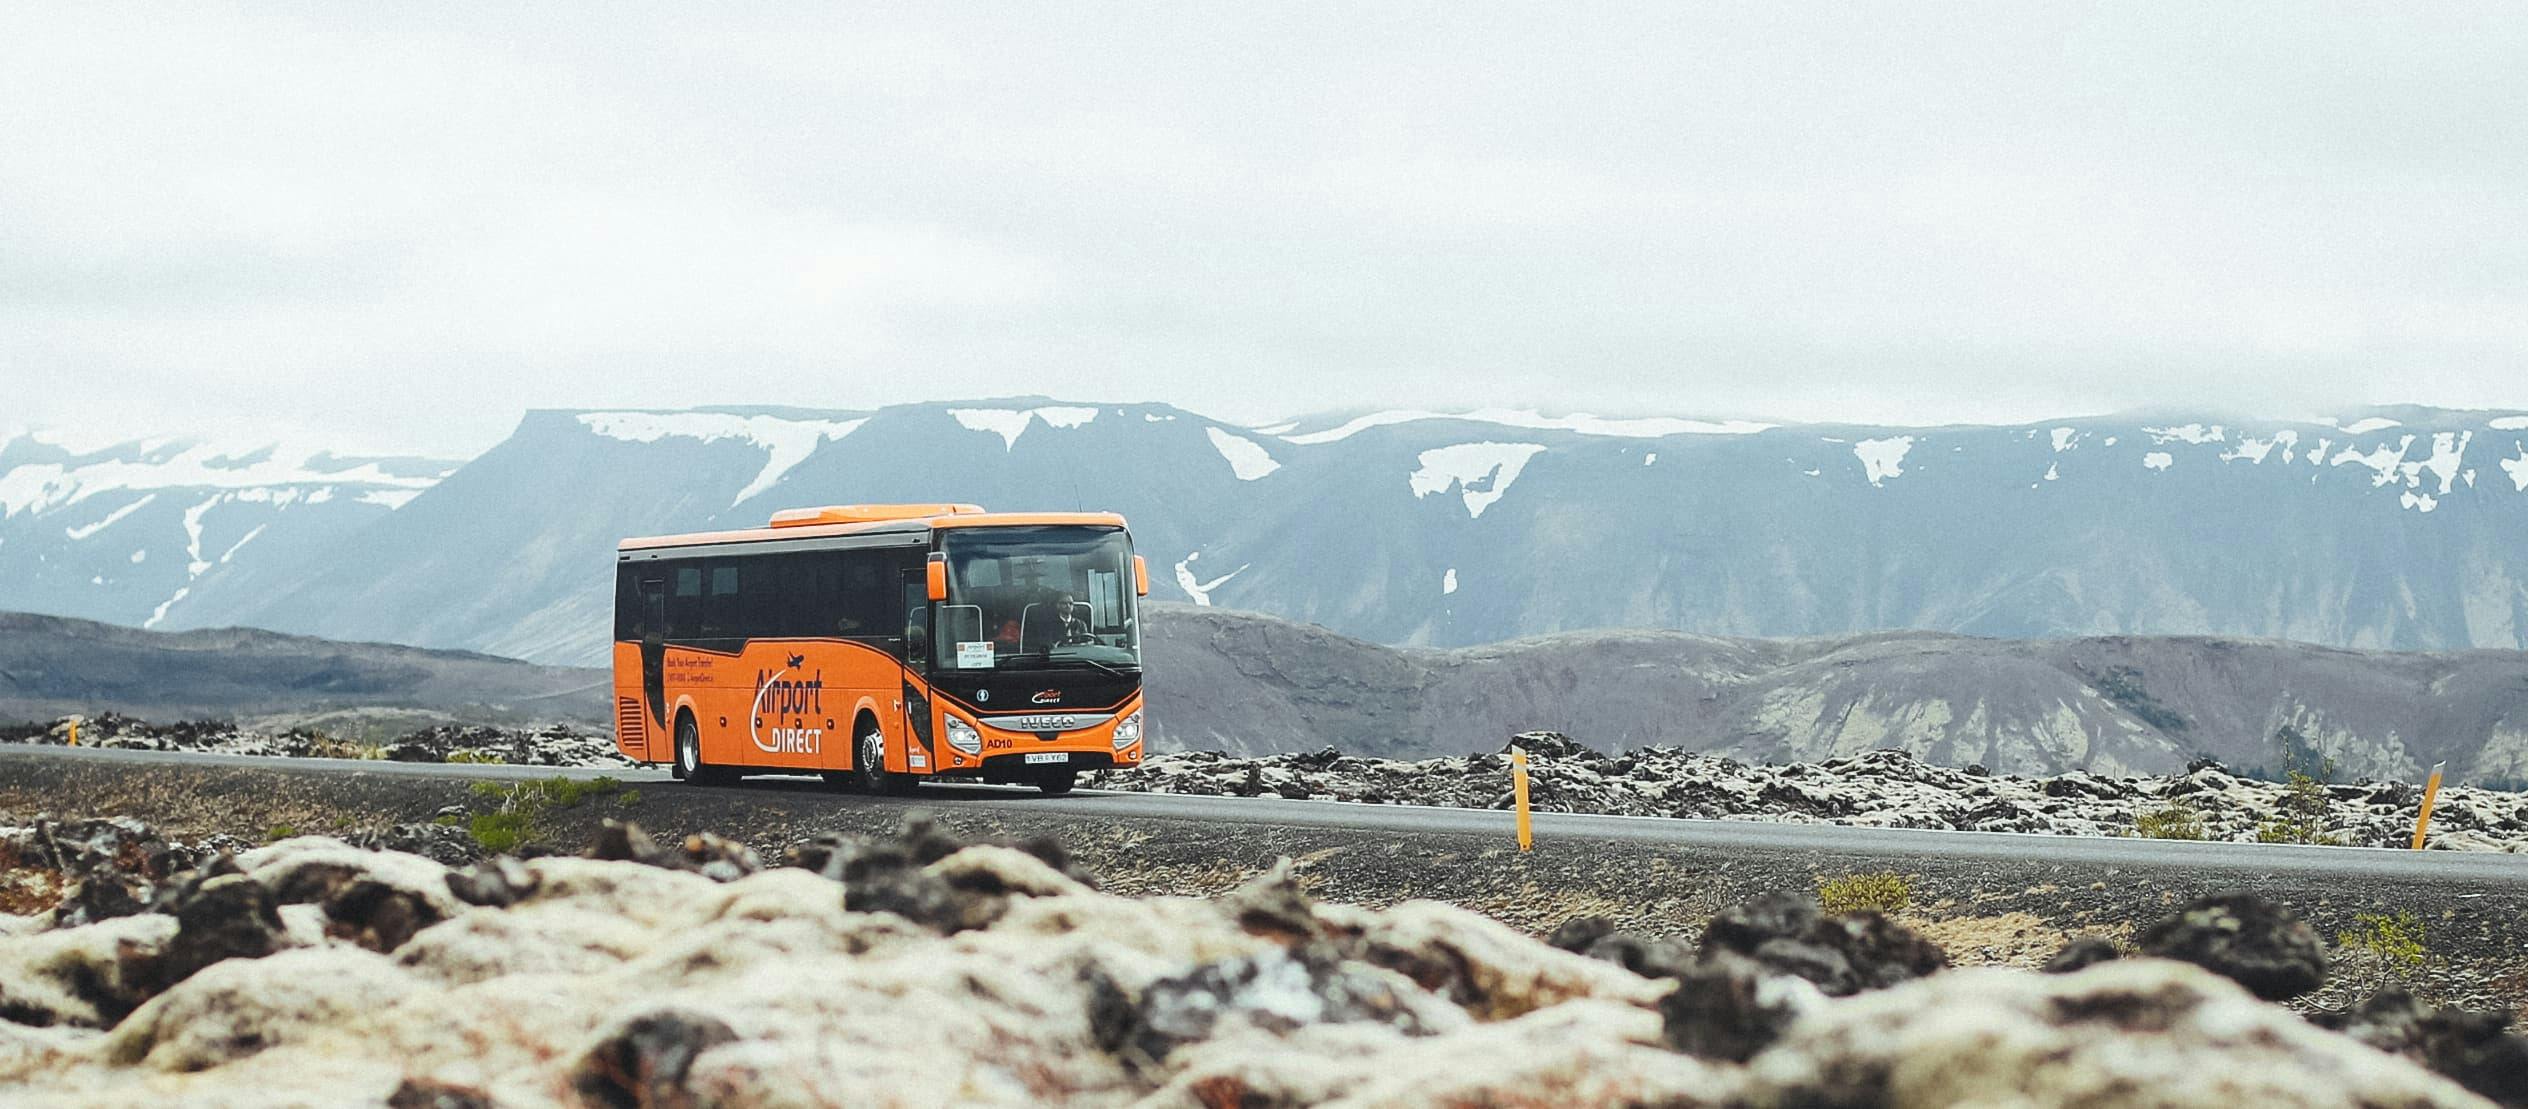 The Airport Direct transfer bus travels from Keflavik Airport to Reykjavik with snow sprinkled on the surrounding Reykjanes peninsula landscape.